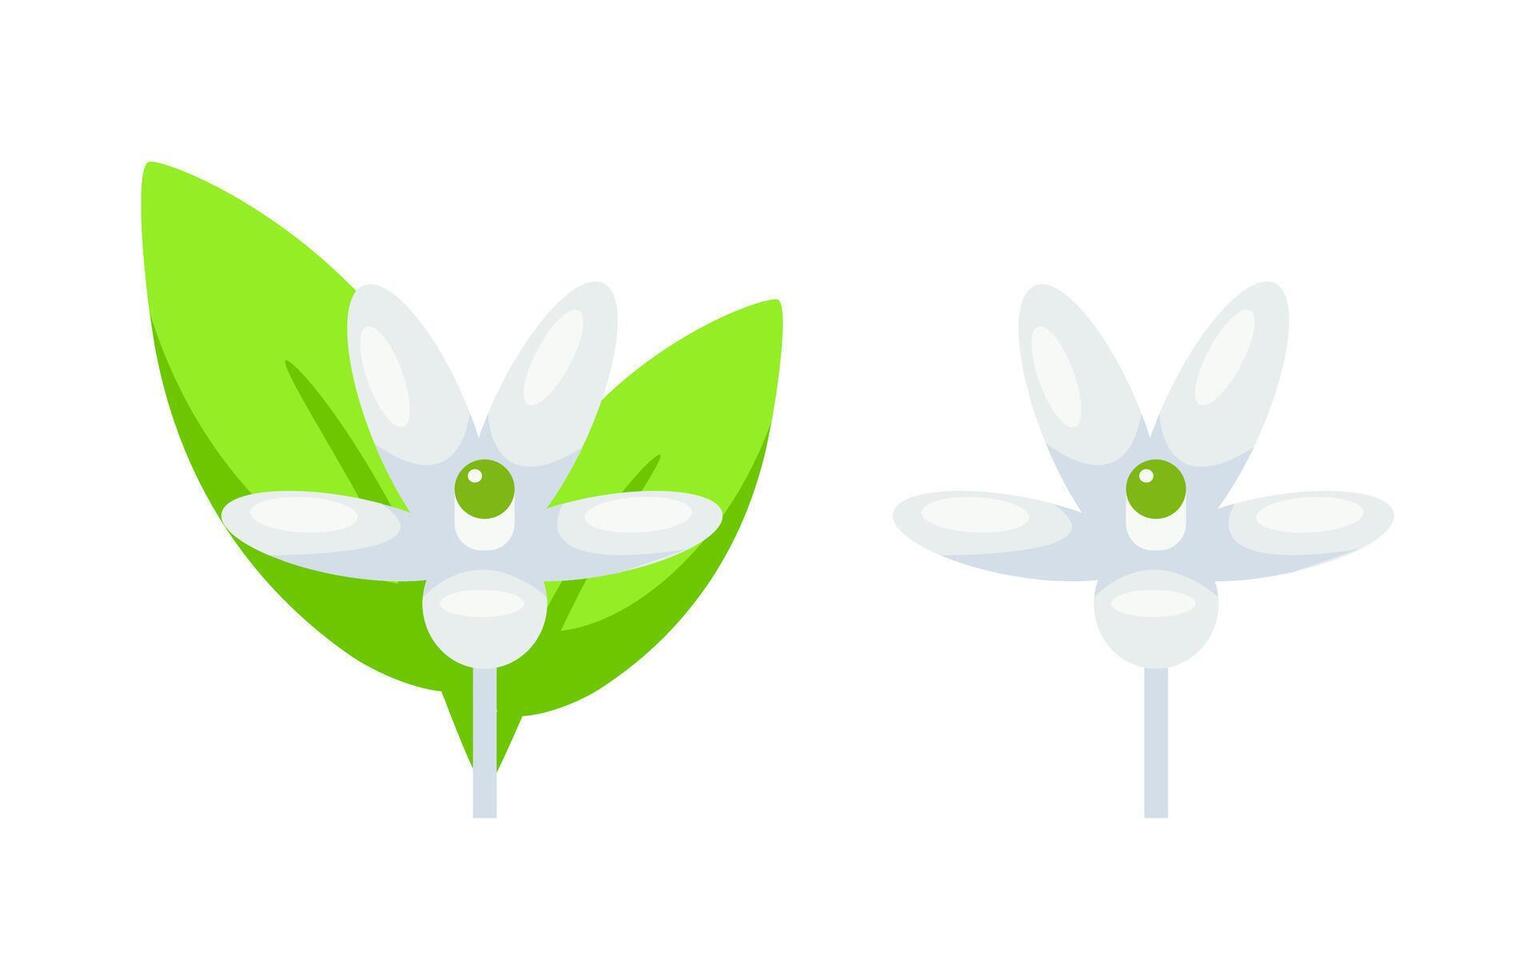 Citrus flower in full bloom next to a budding flower, depicted with a simplistic style on a white background vector